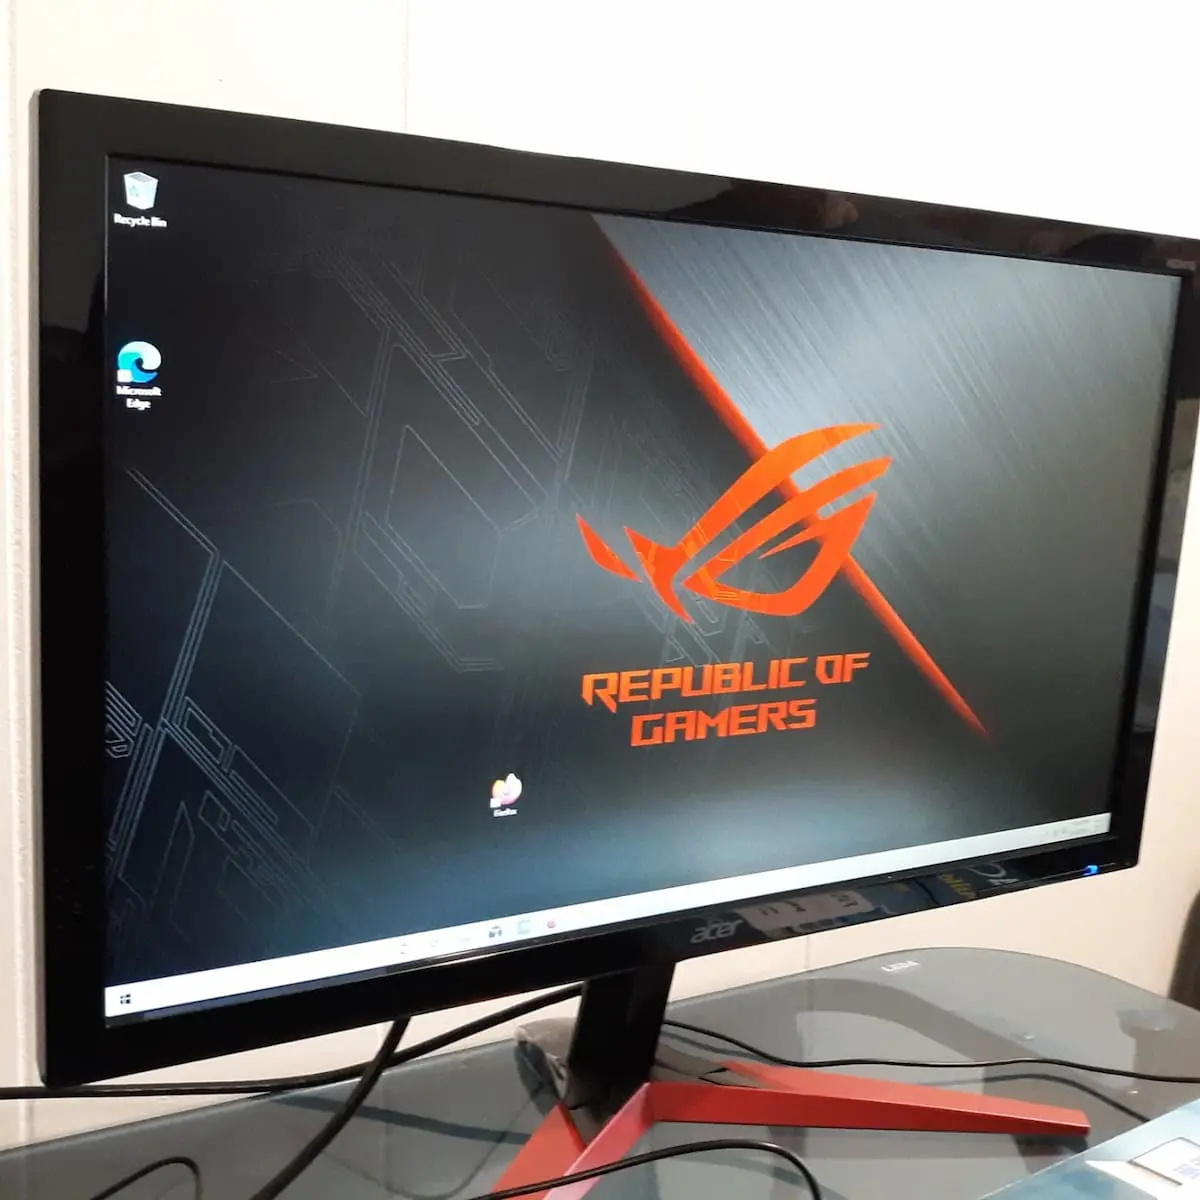 Acer-Nitro-KG241Y-Sbiip-23.8-Full-HD-Gaming-Monitor-Review